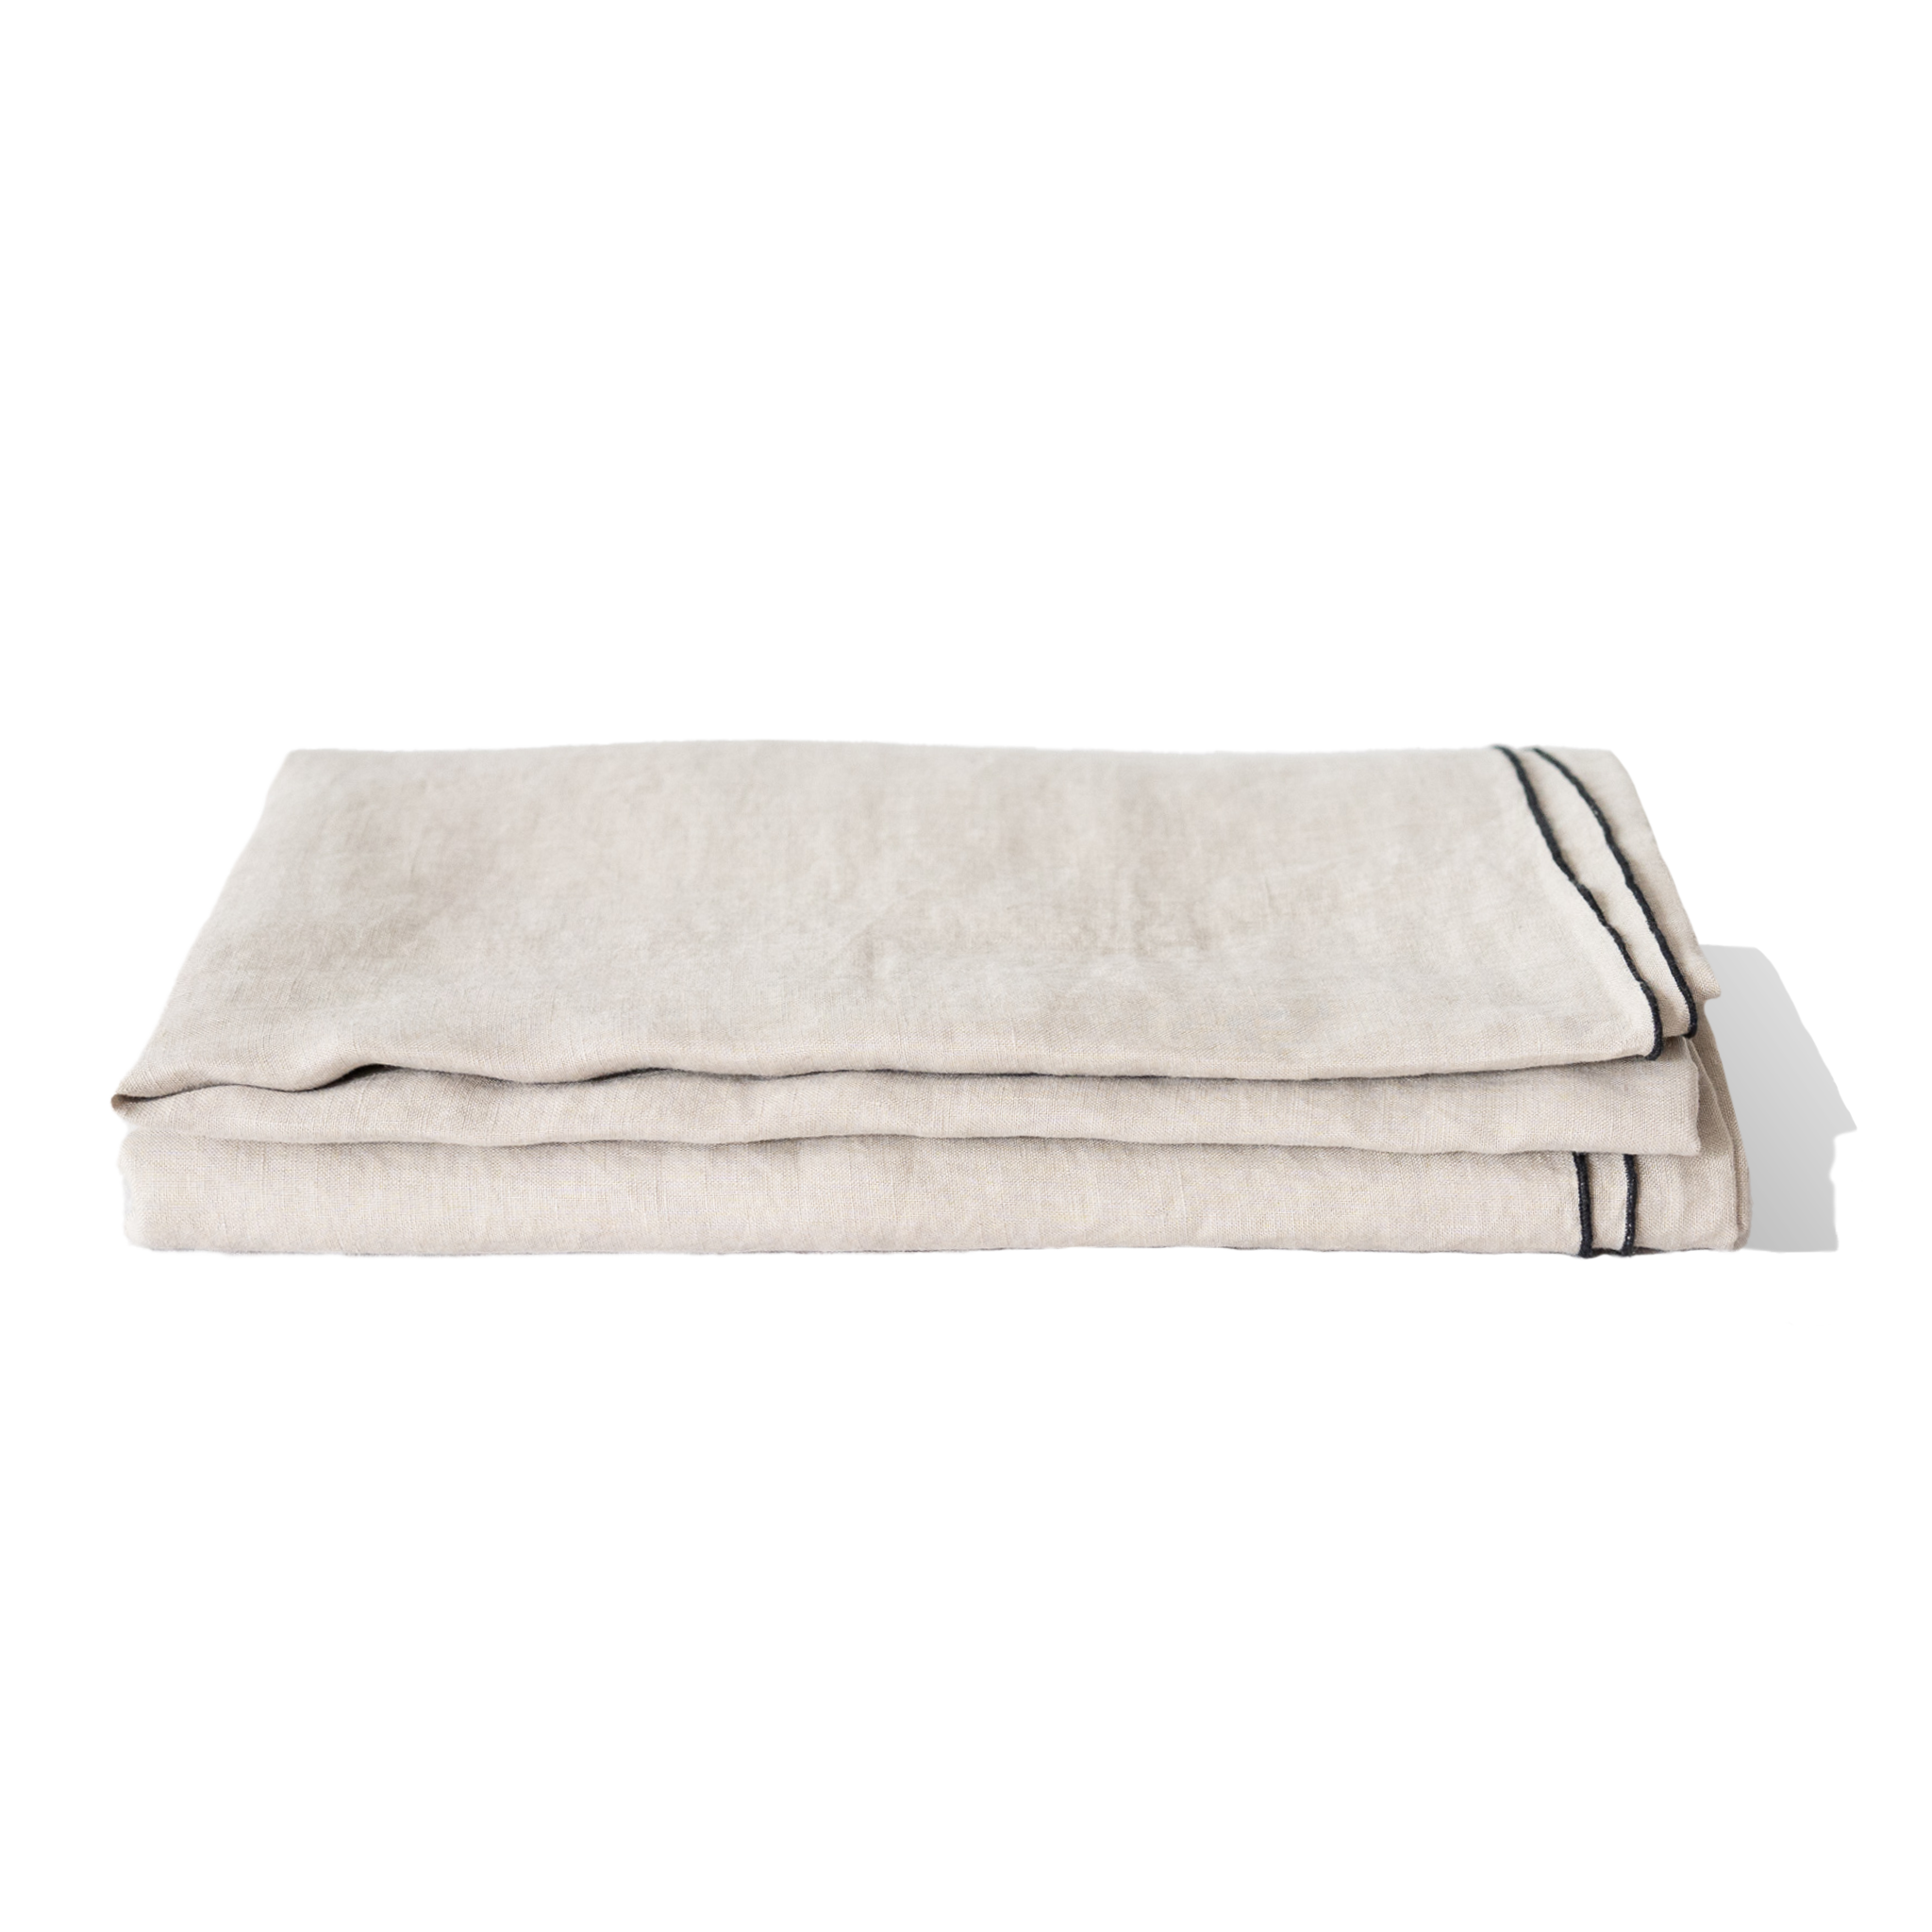 Natural Beige linen tablecloth with black edge